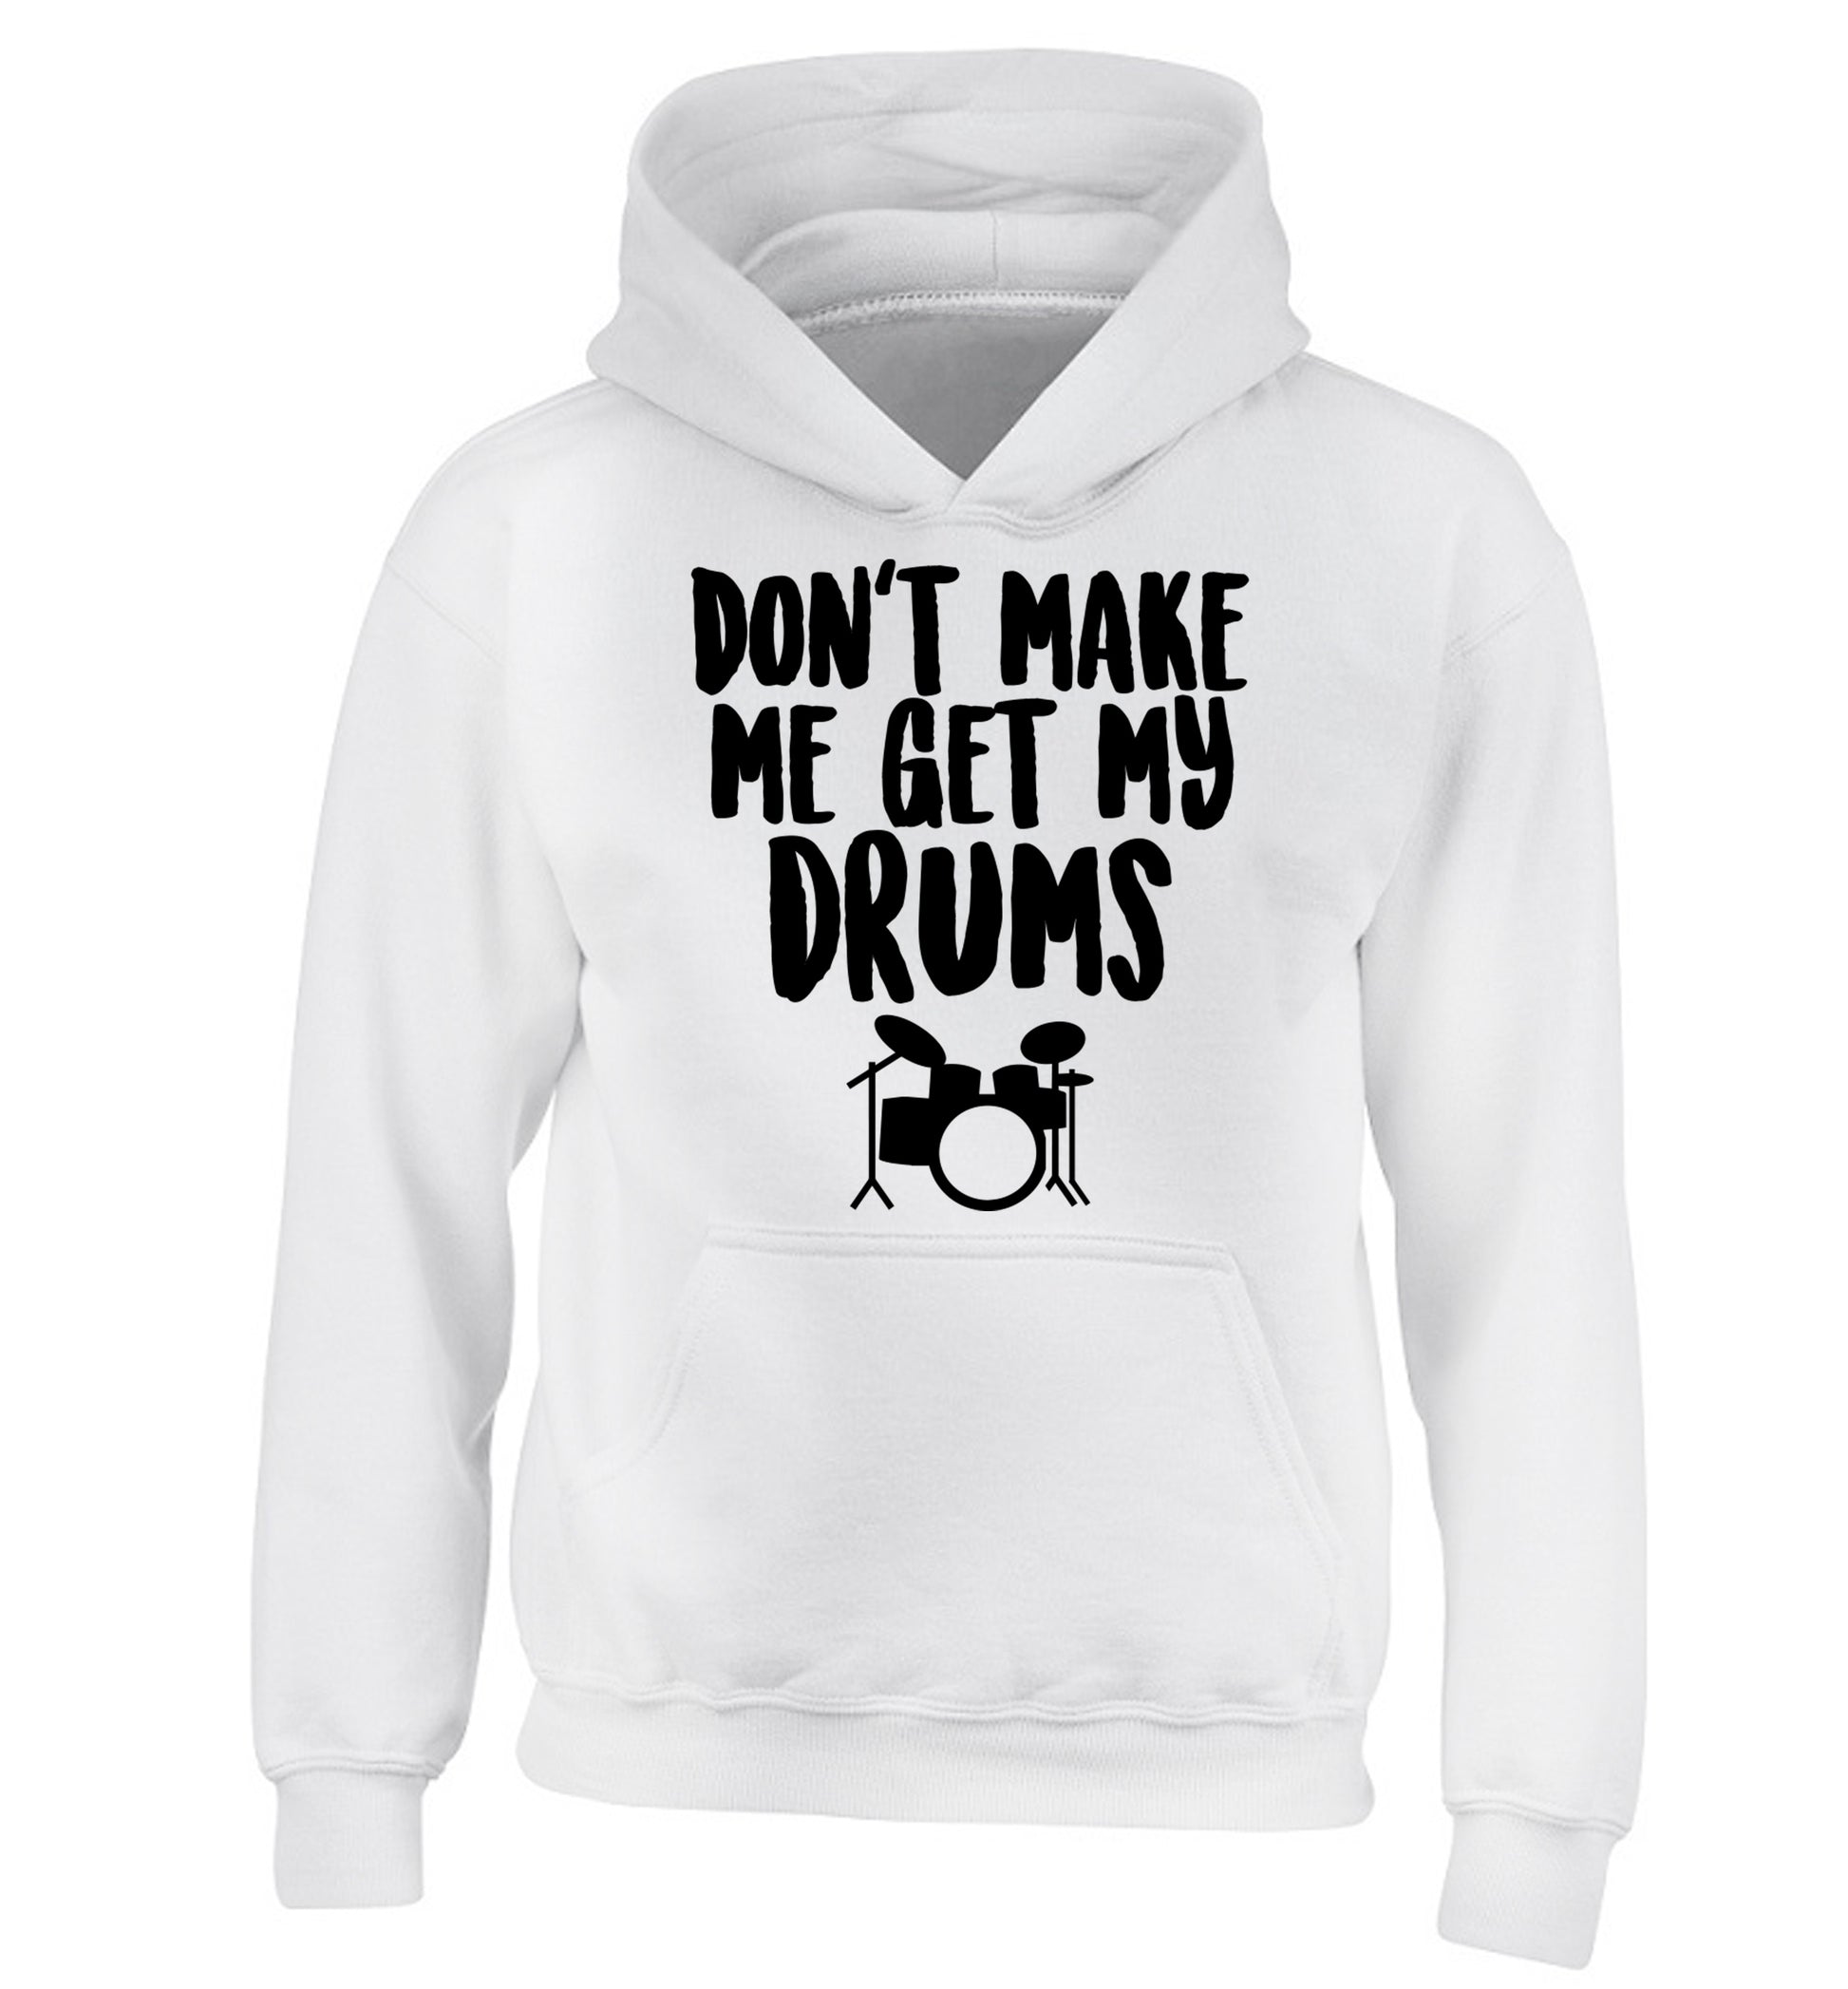 Don't make me get my drums children's white hoodie 12-14 Years